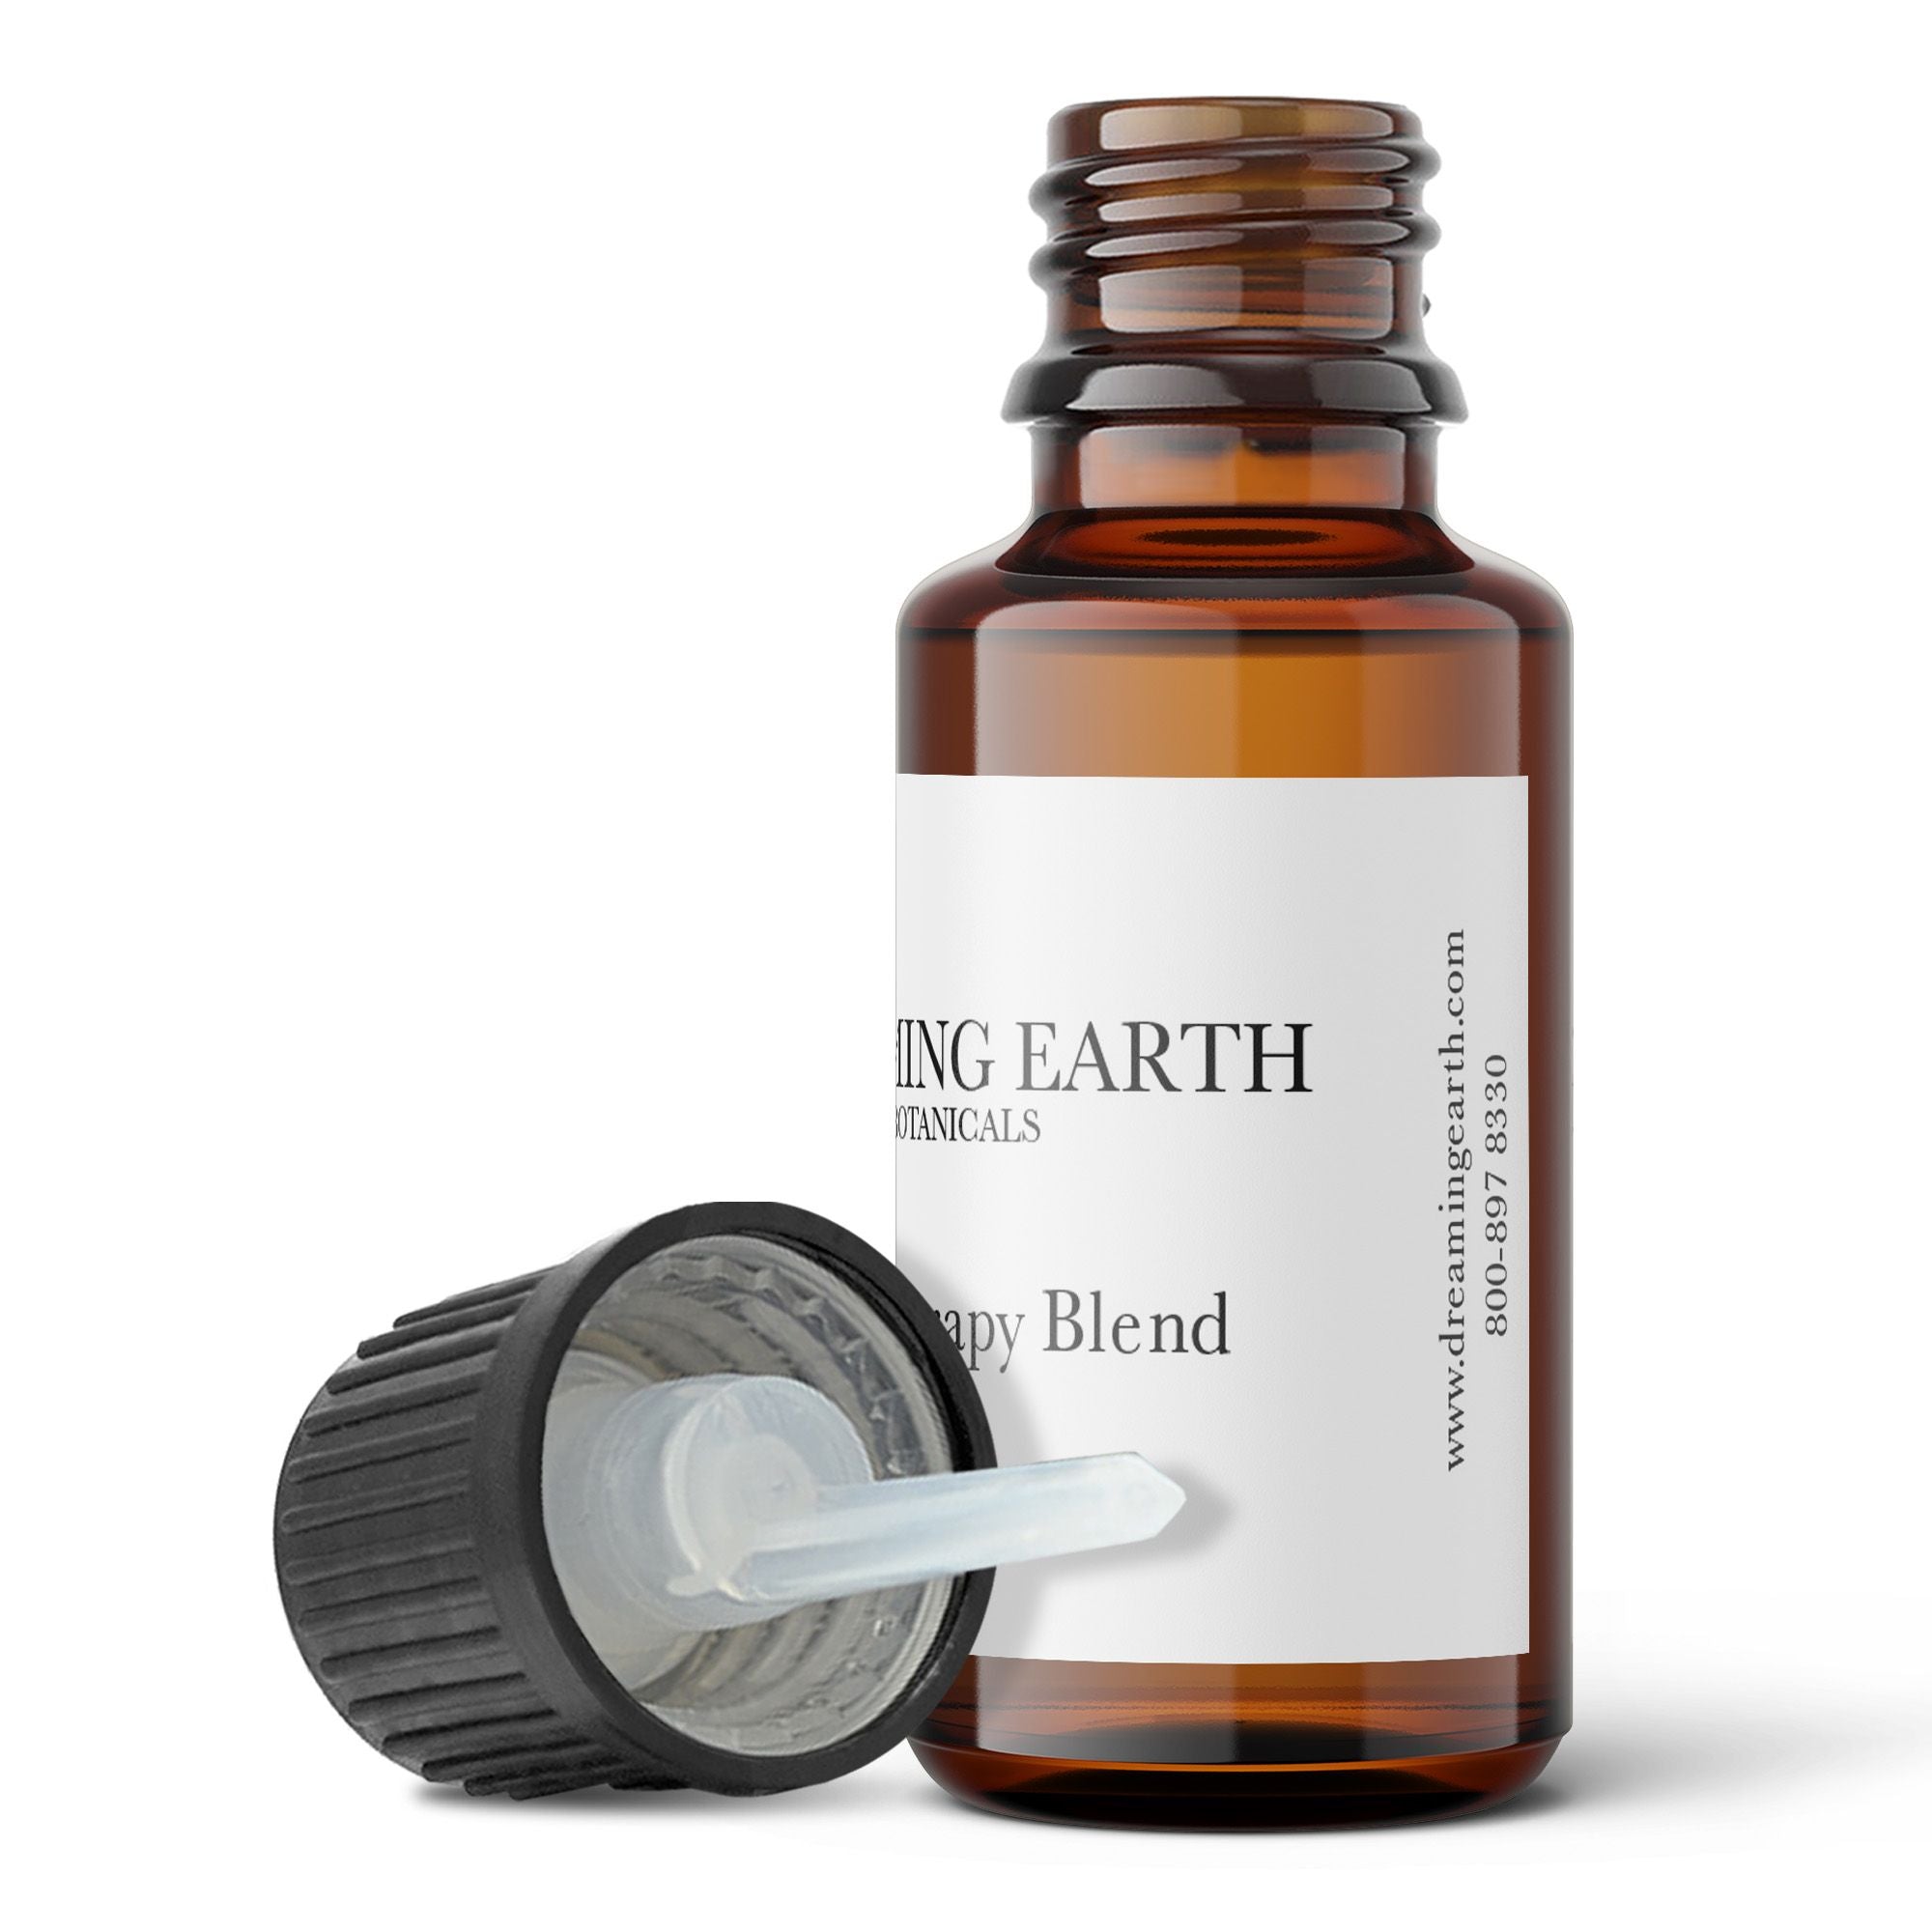 Load image into Gallery viewer, Germ Buster Essential Oil Blend - Dreaming Earth Inc
